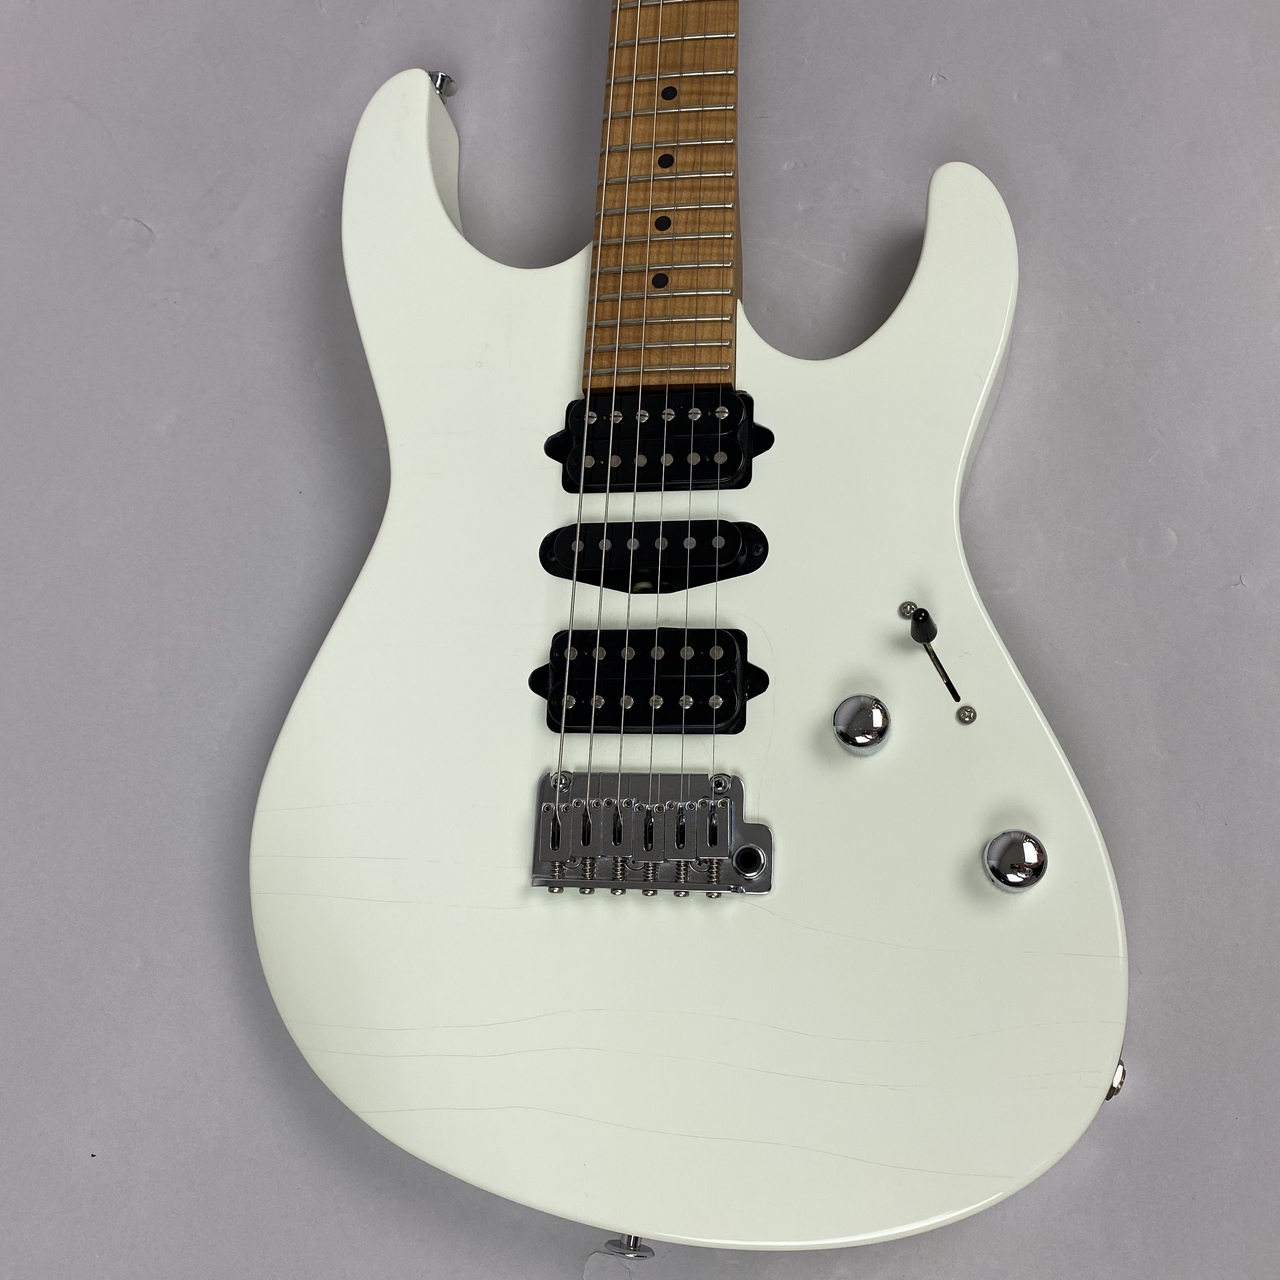 Suhr Custom Modern Antique Rosted Alder Body Chambered Nickel frets - Olympic White